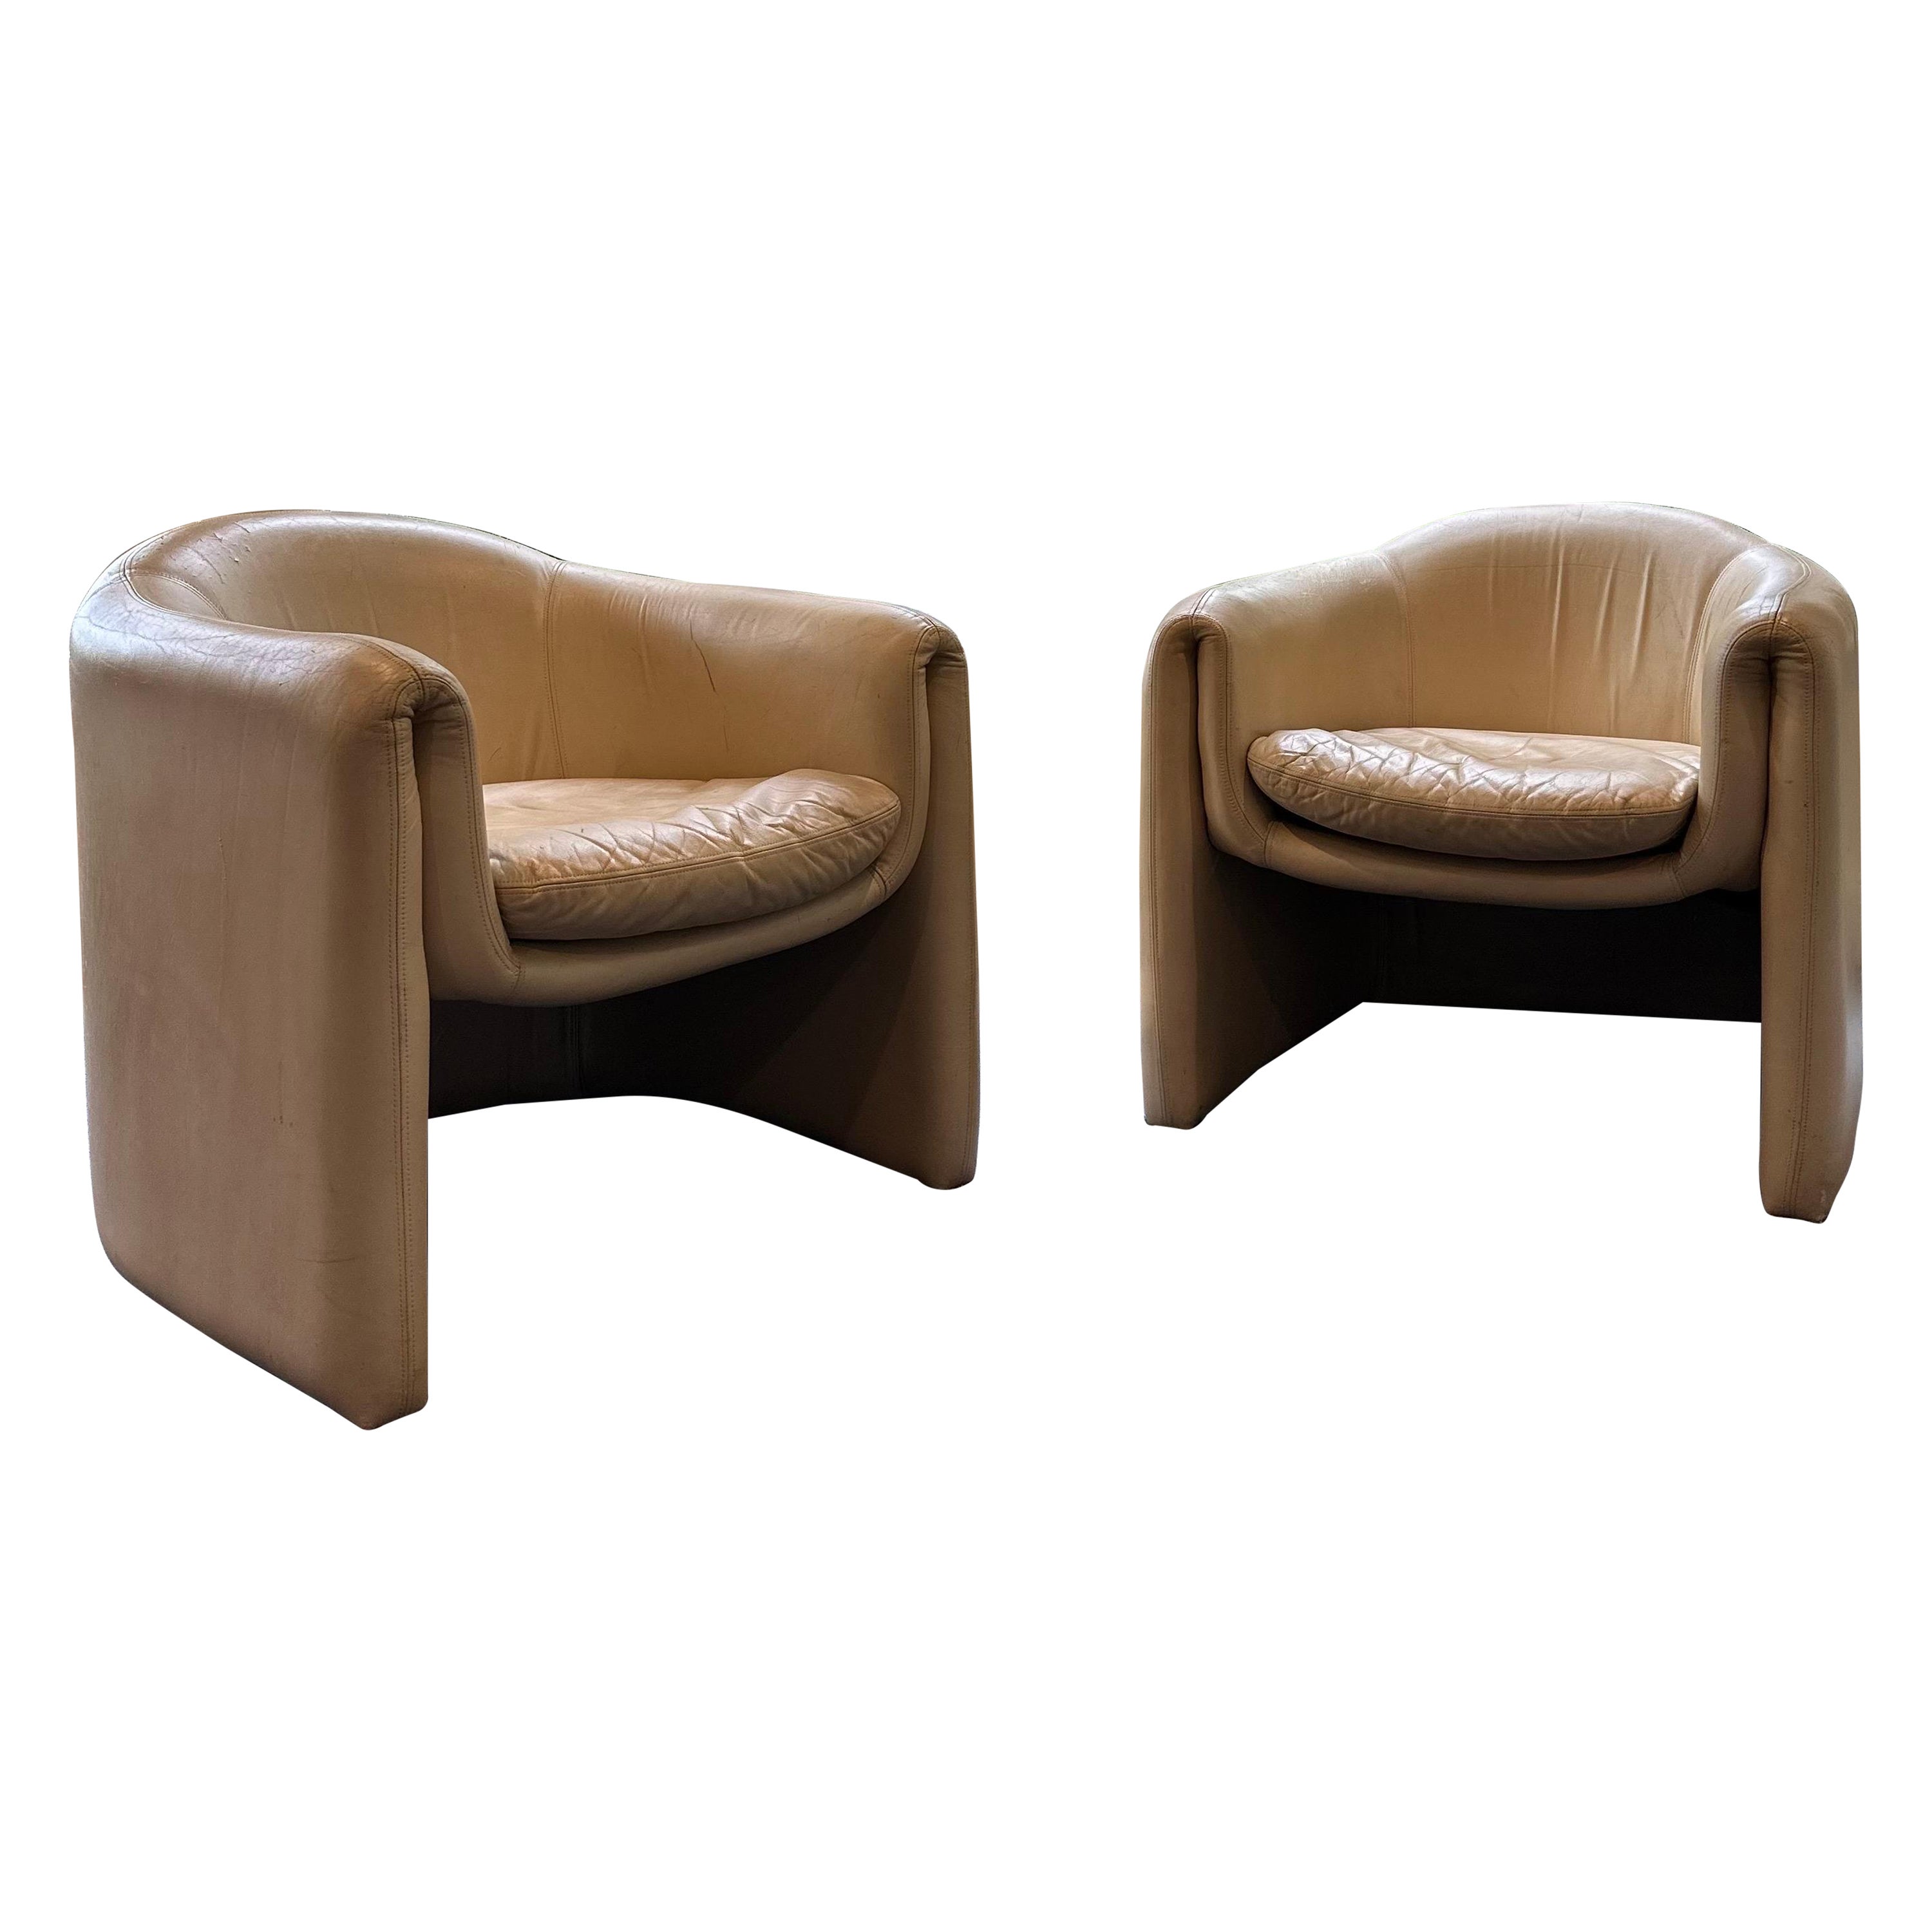 1980s Vladimir Kagan Biomorphic Preview Chairs - a pair For Sale